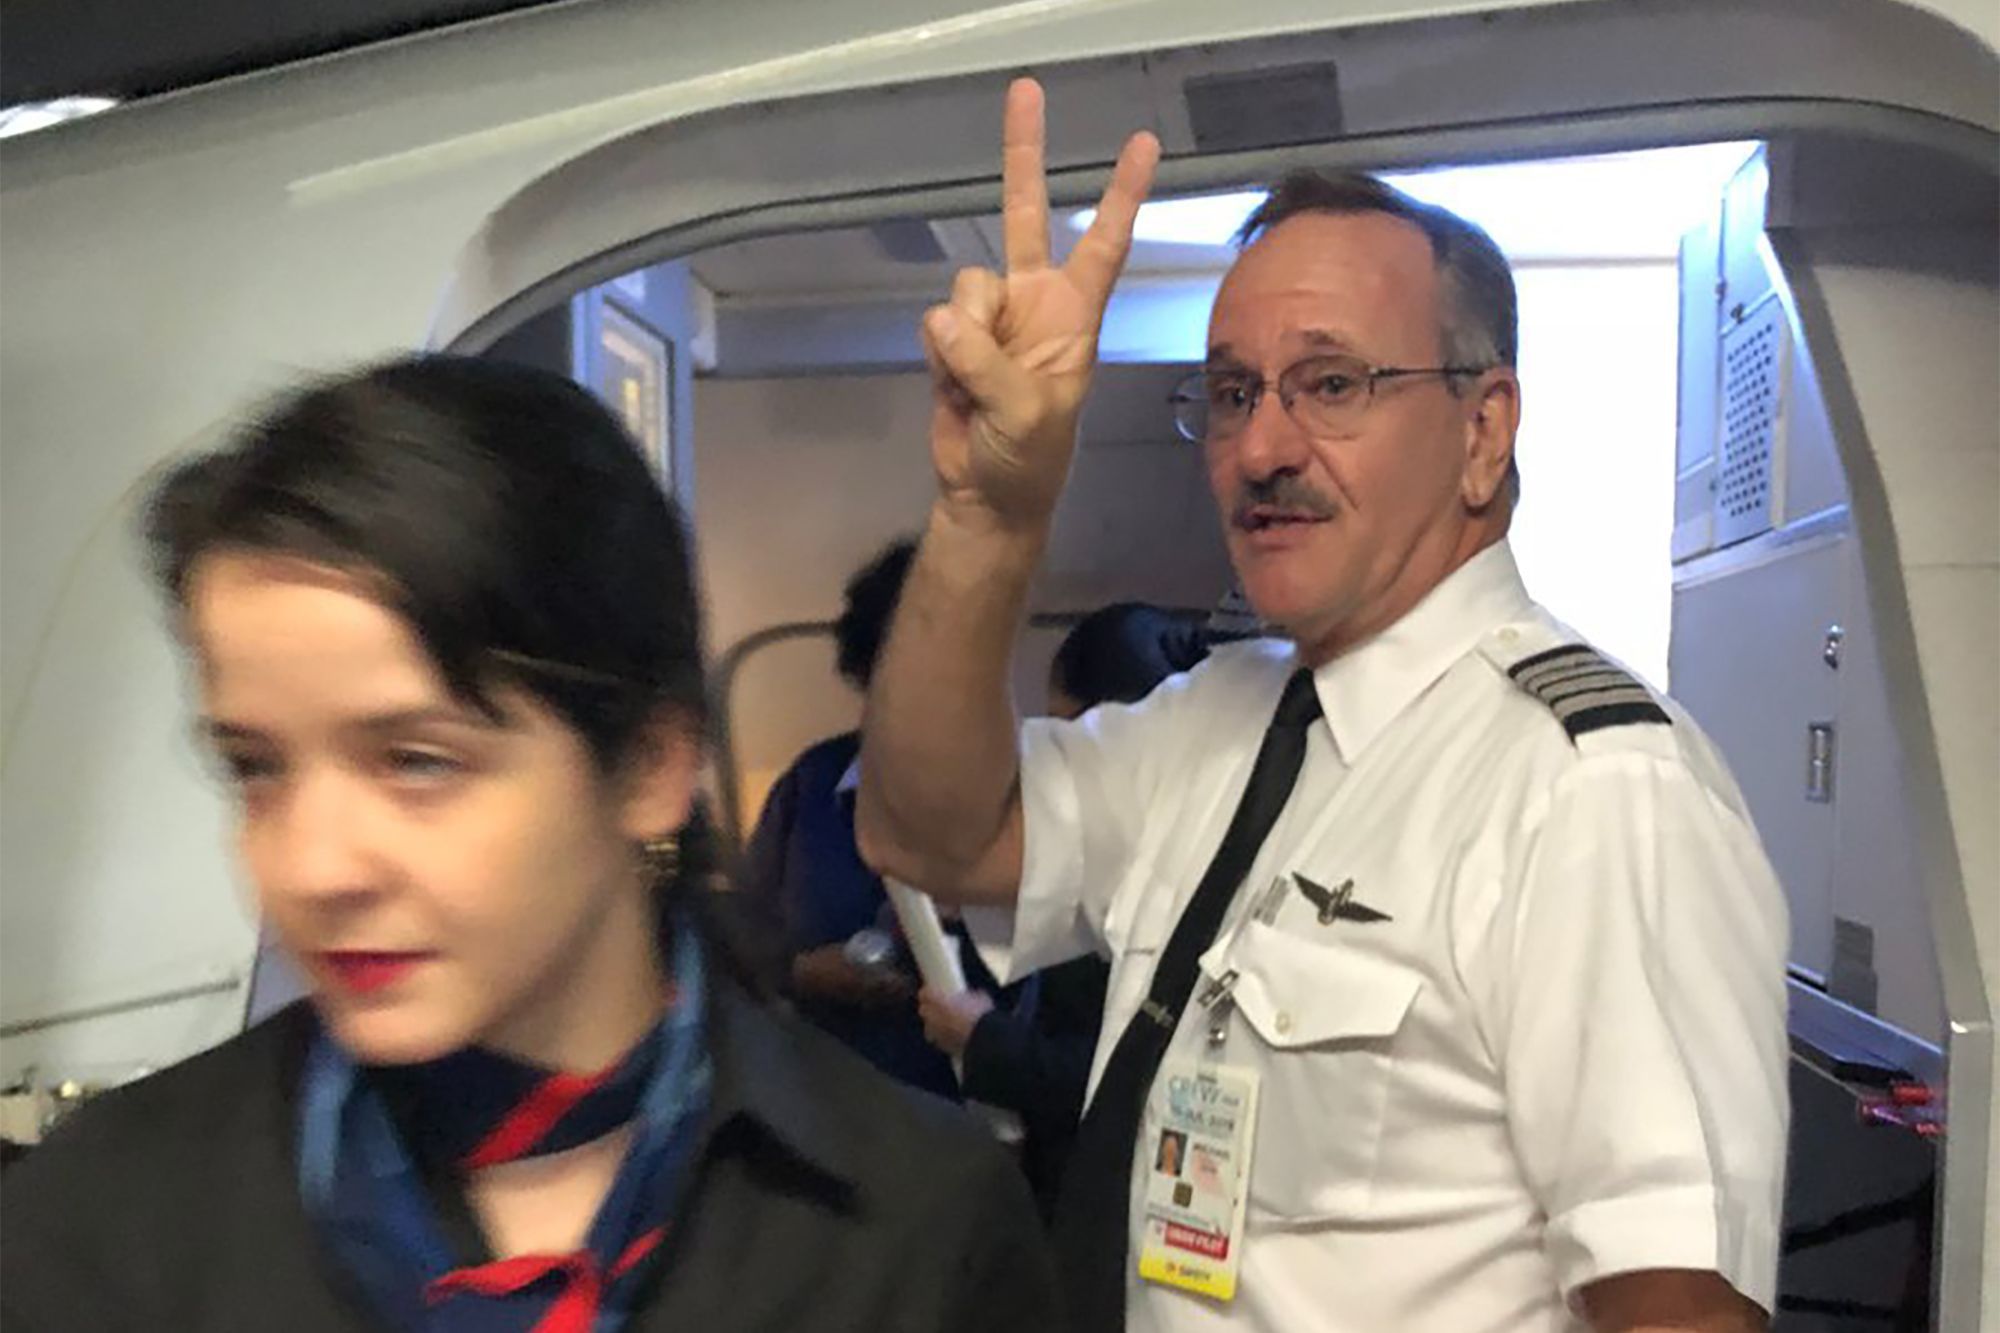 Pilot giving the peace sign 